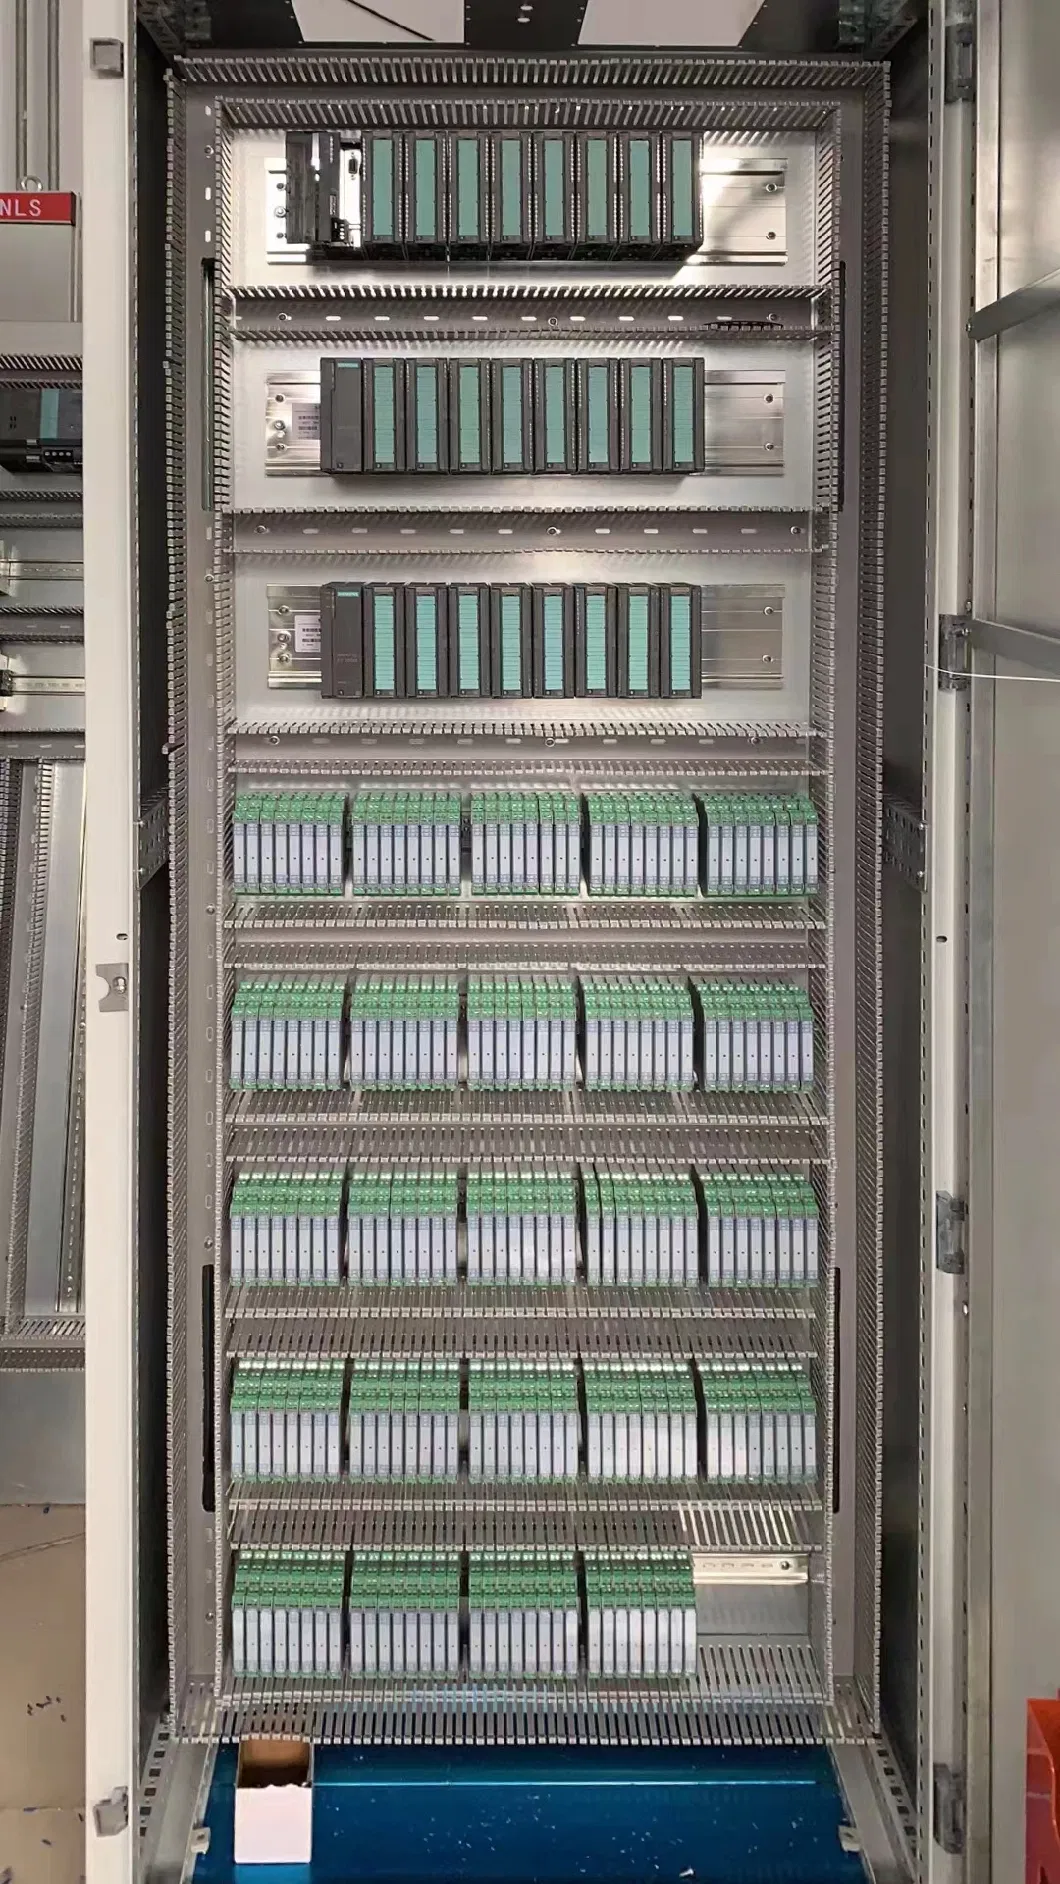 Industry Automation Control Panel, PLC Cabinet